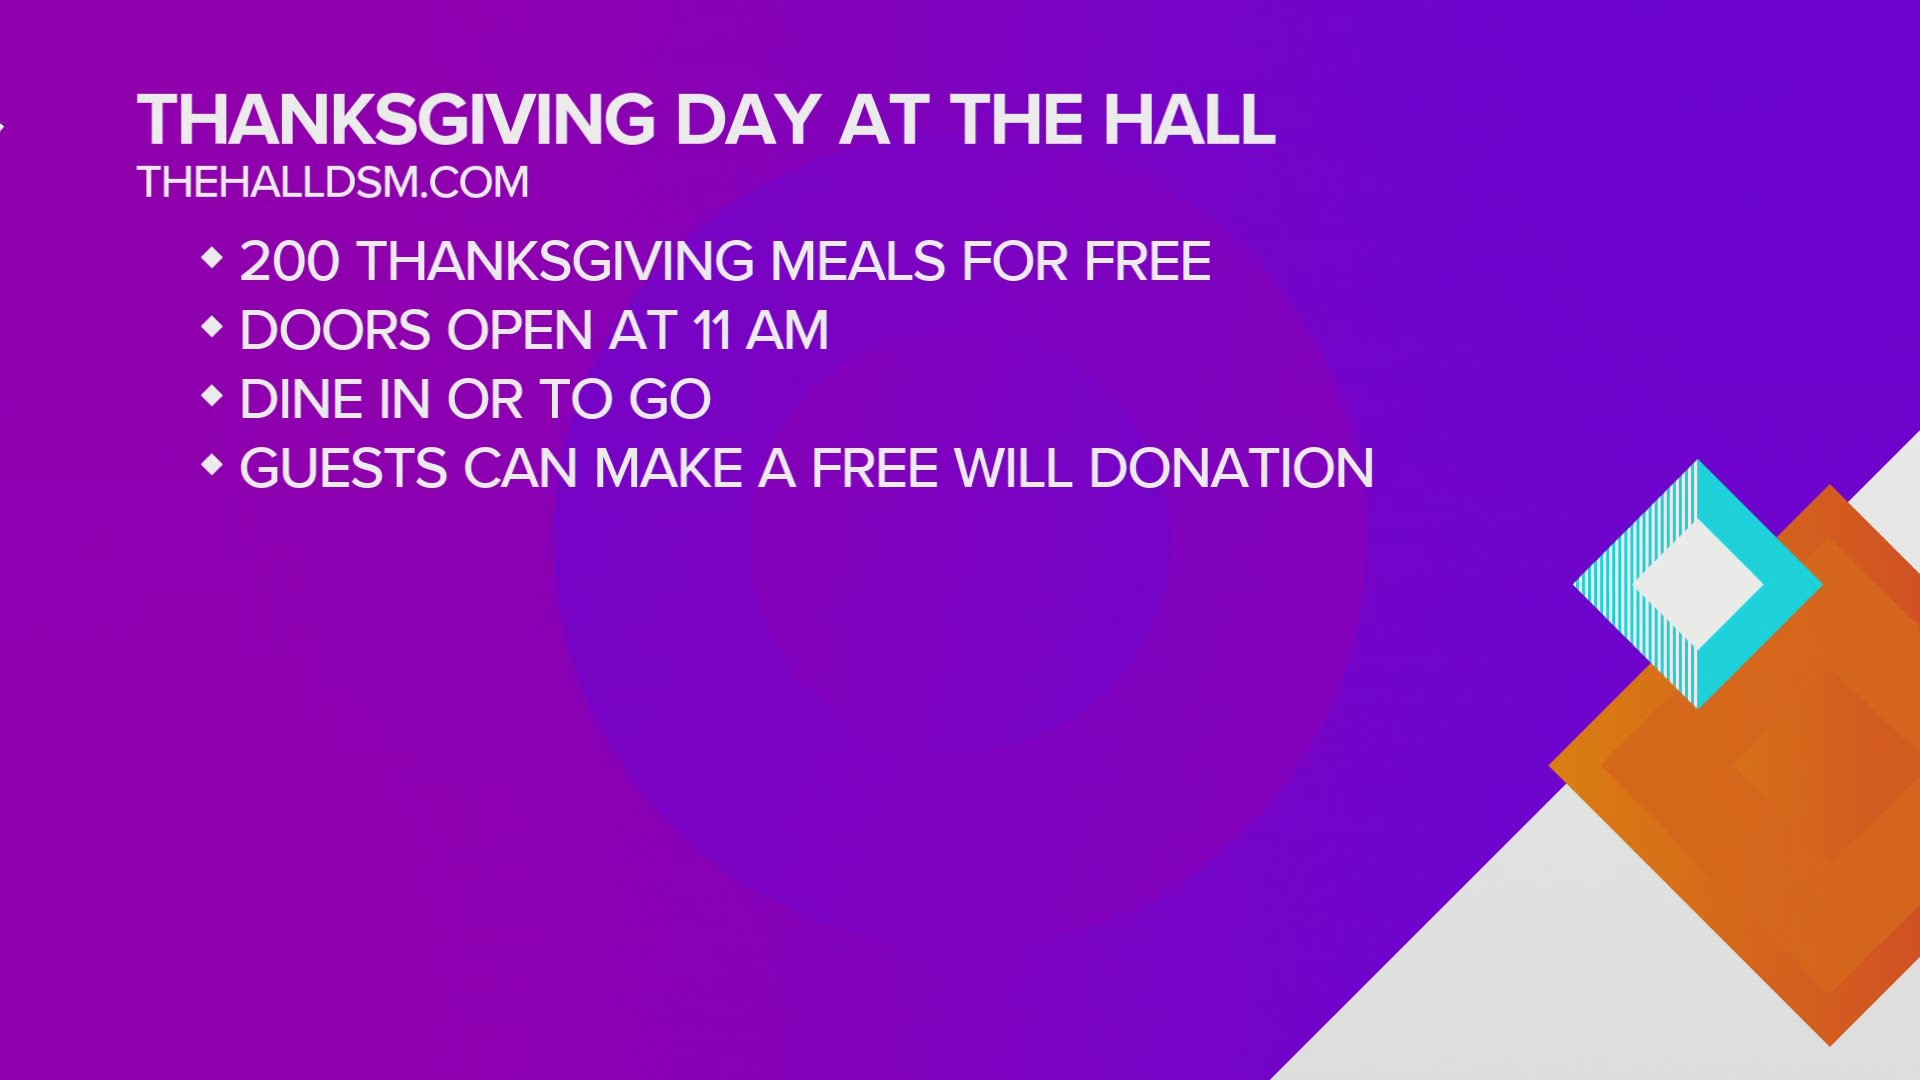 The Hall will have free meals on Thanksgiving Day